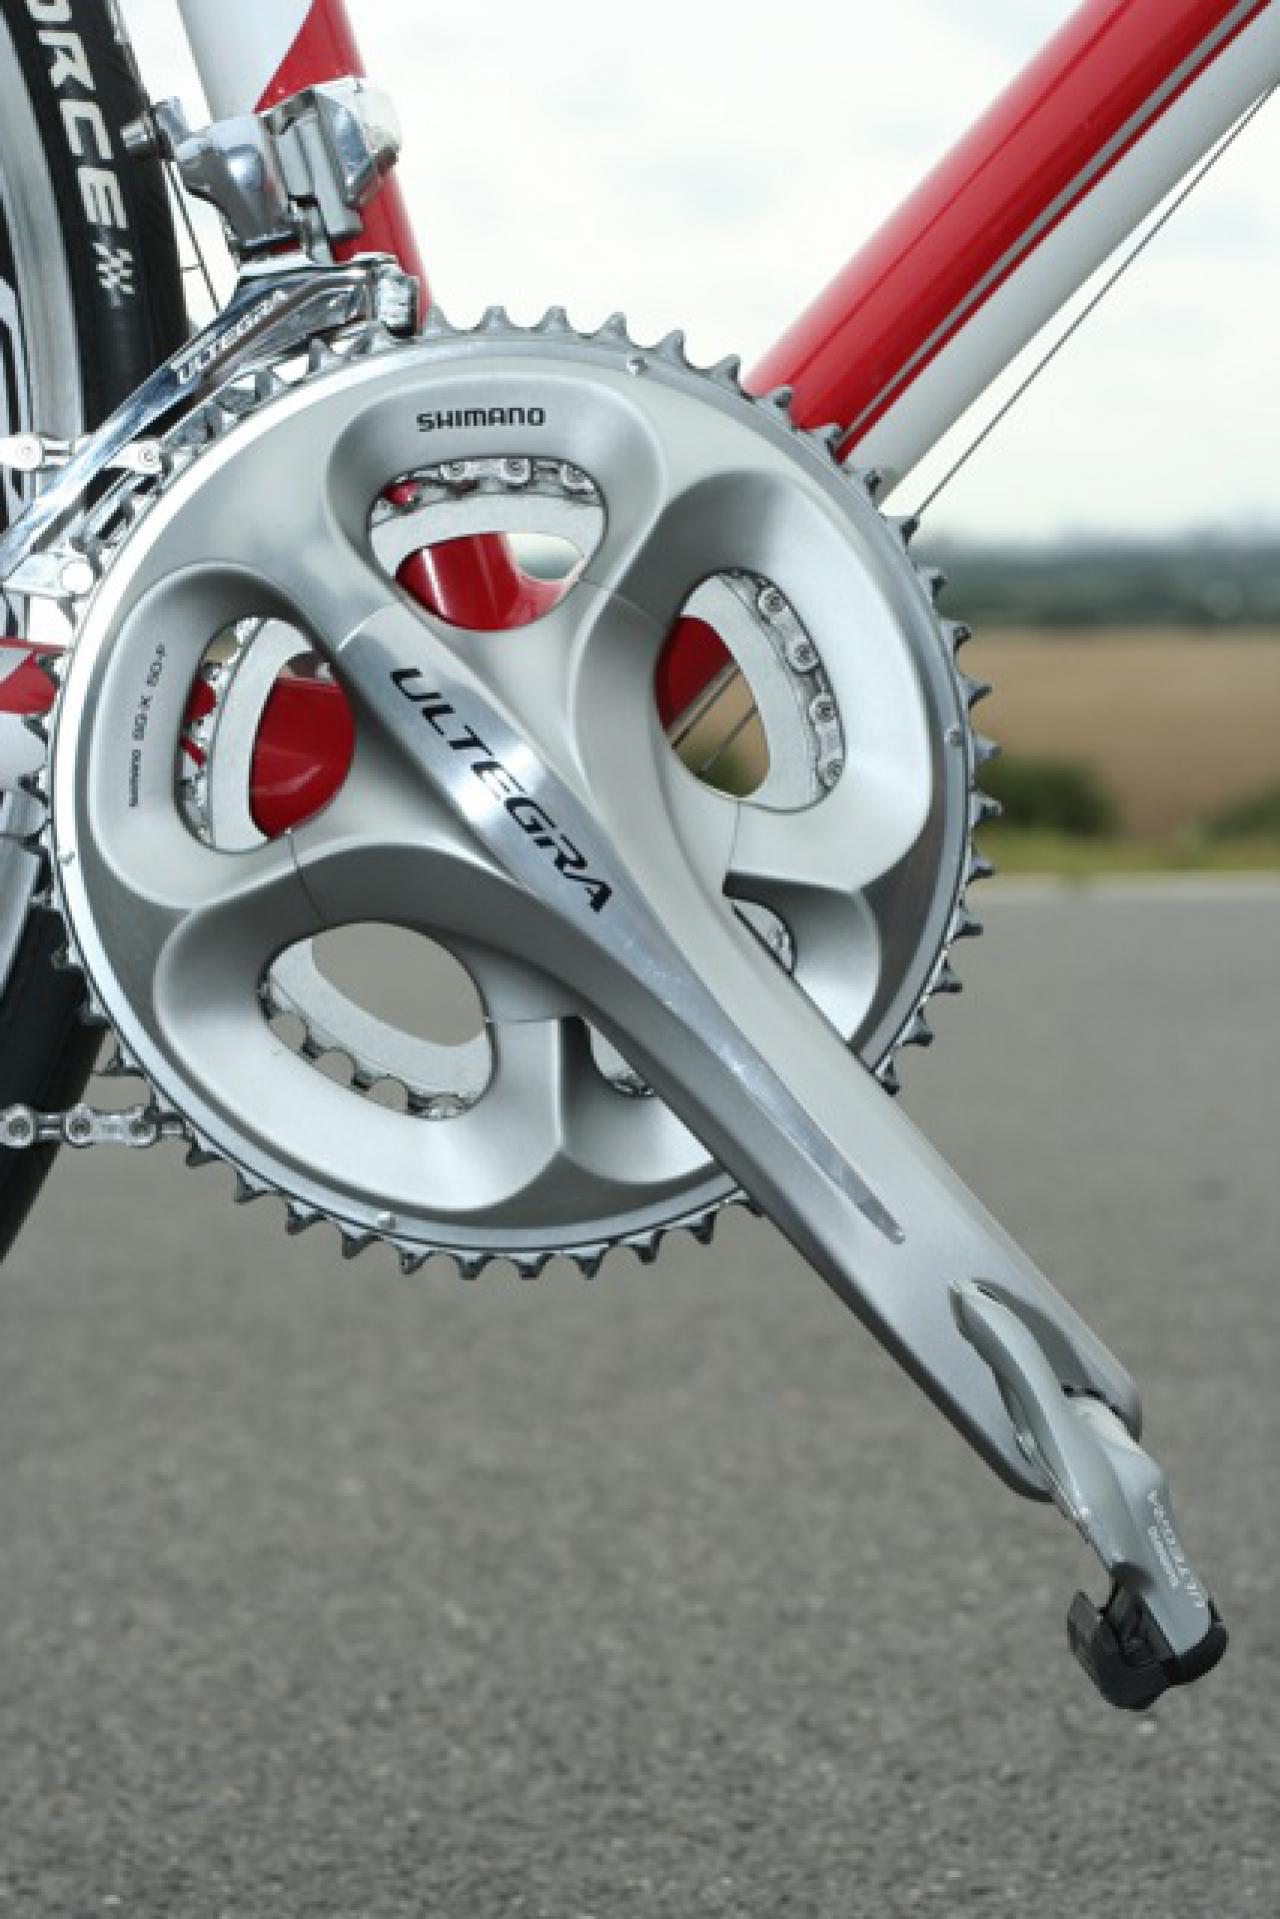 Review: Shimano Ultegra 6700 groupset | road.cc